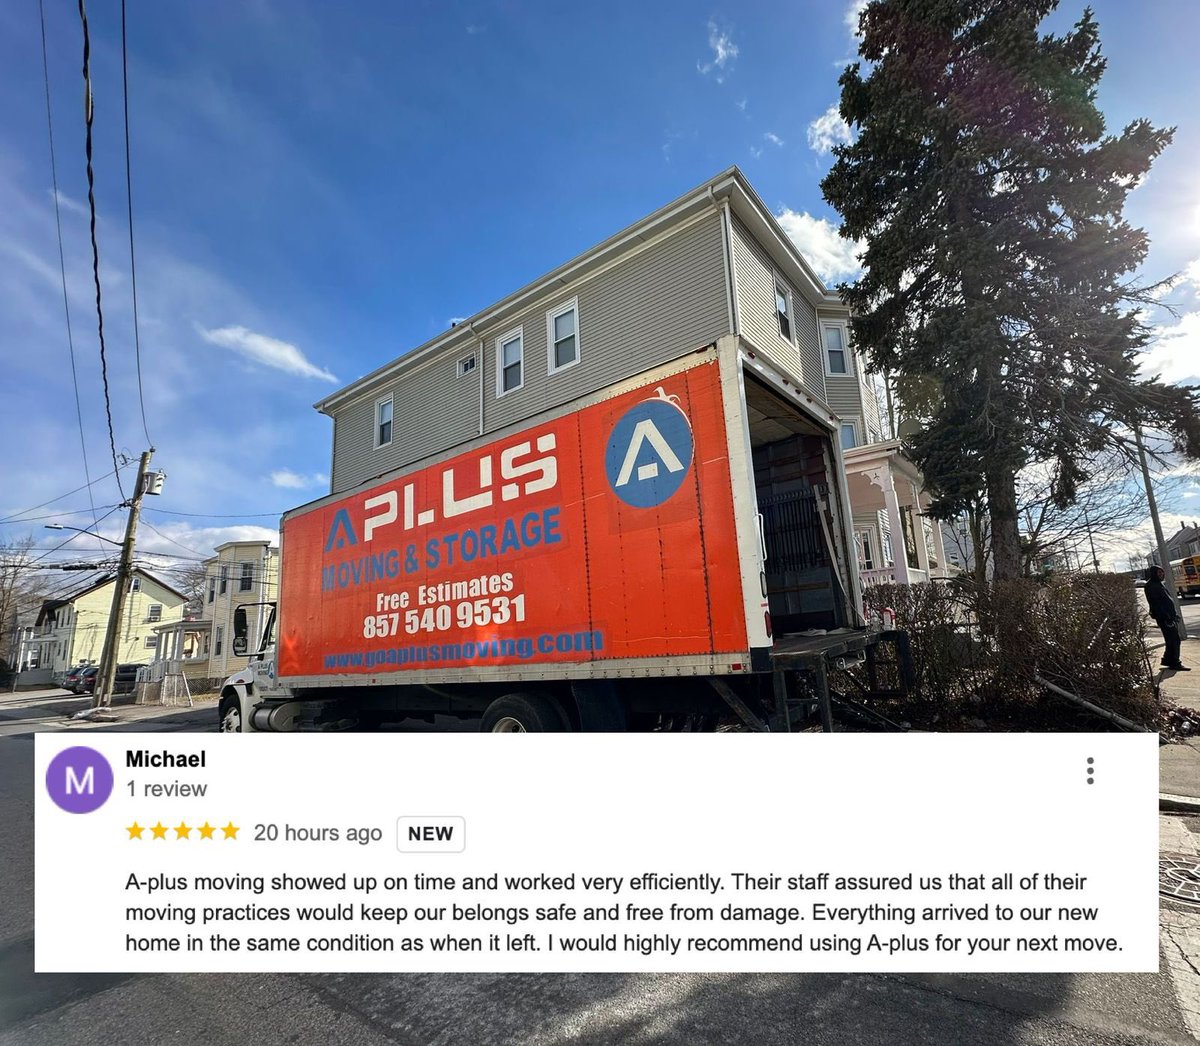 Thank you for the wonderful review!

#movingcompaniesboston #moversboston #movers 
#bostonbestmovers #moversboston #bestofboston
#movingcompanies #bostonmovers #bostonmovinghelp 
#moversnearme #boston #aplusmoving #aplusmovers
#movingservices #professionalmovers #moving